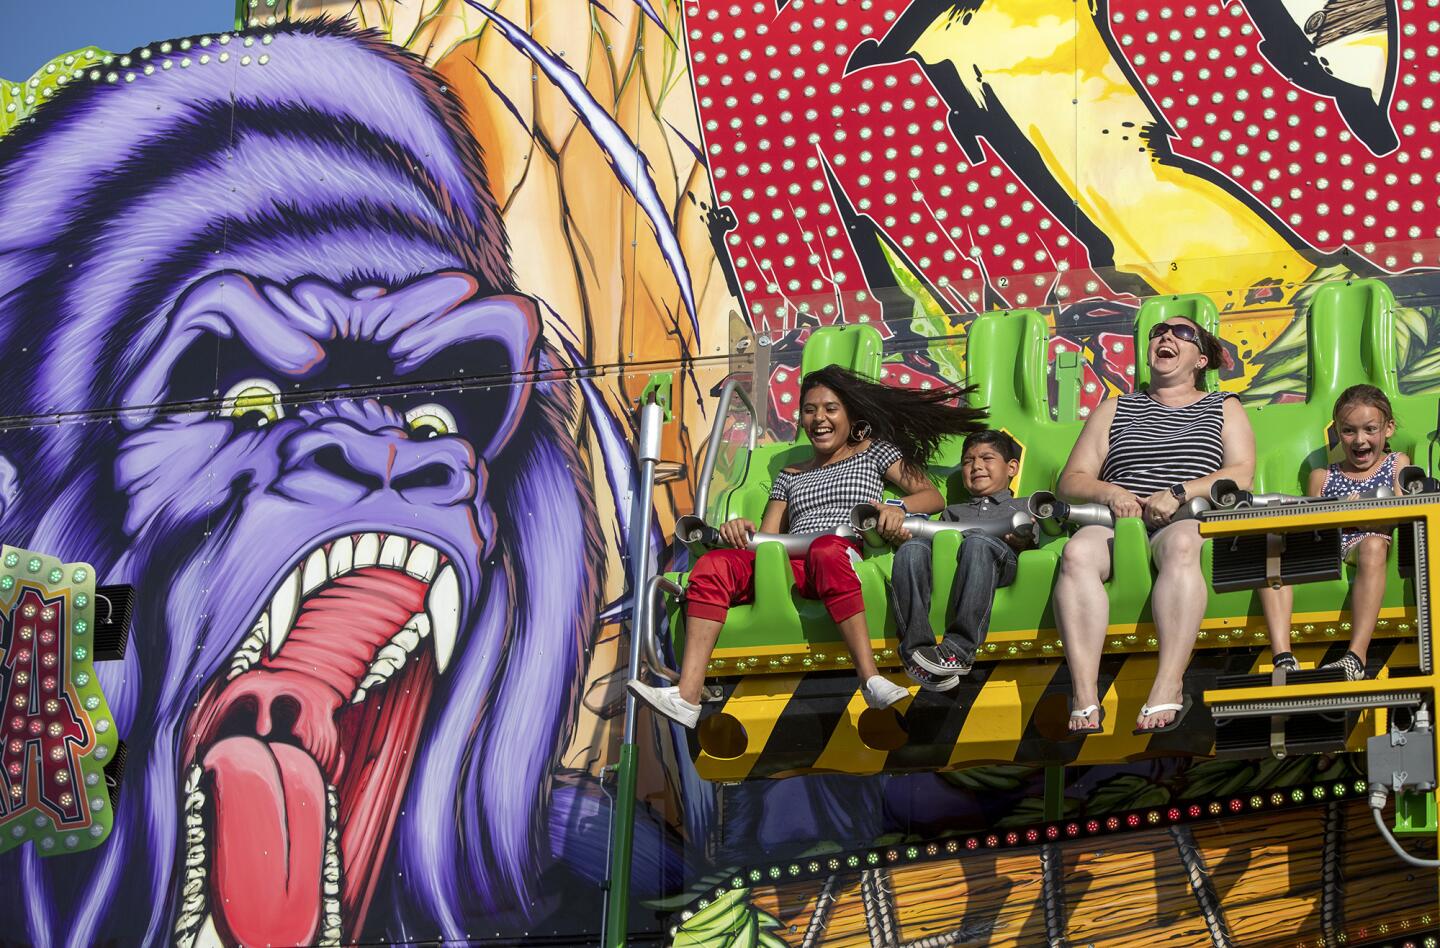 Visitors ride the new Konga attraction at the Orange County Fair.